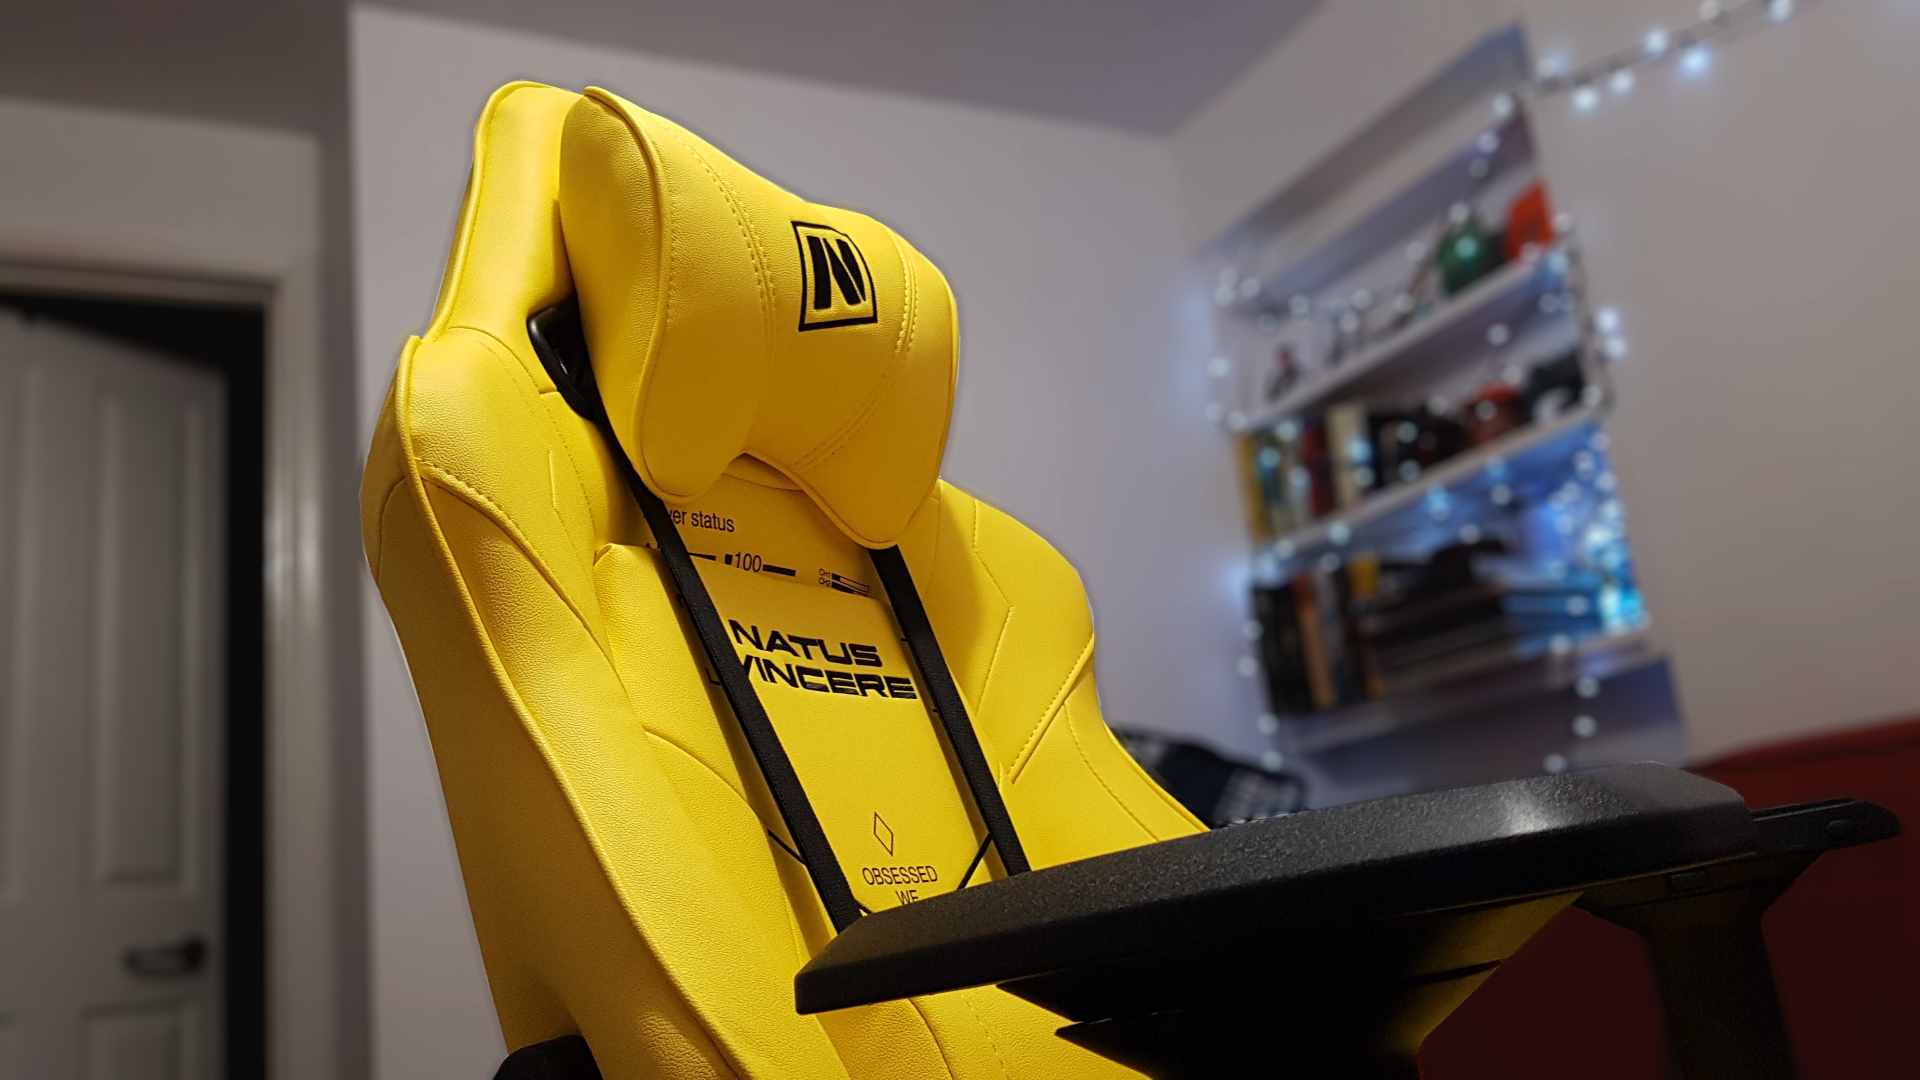 The Andaseat Na'Vi Edition gaming chair in bright yellow